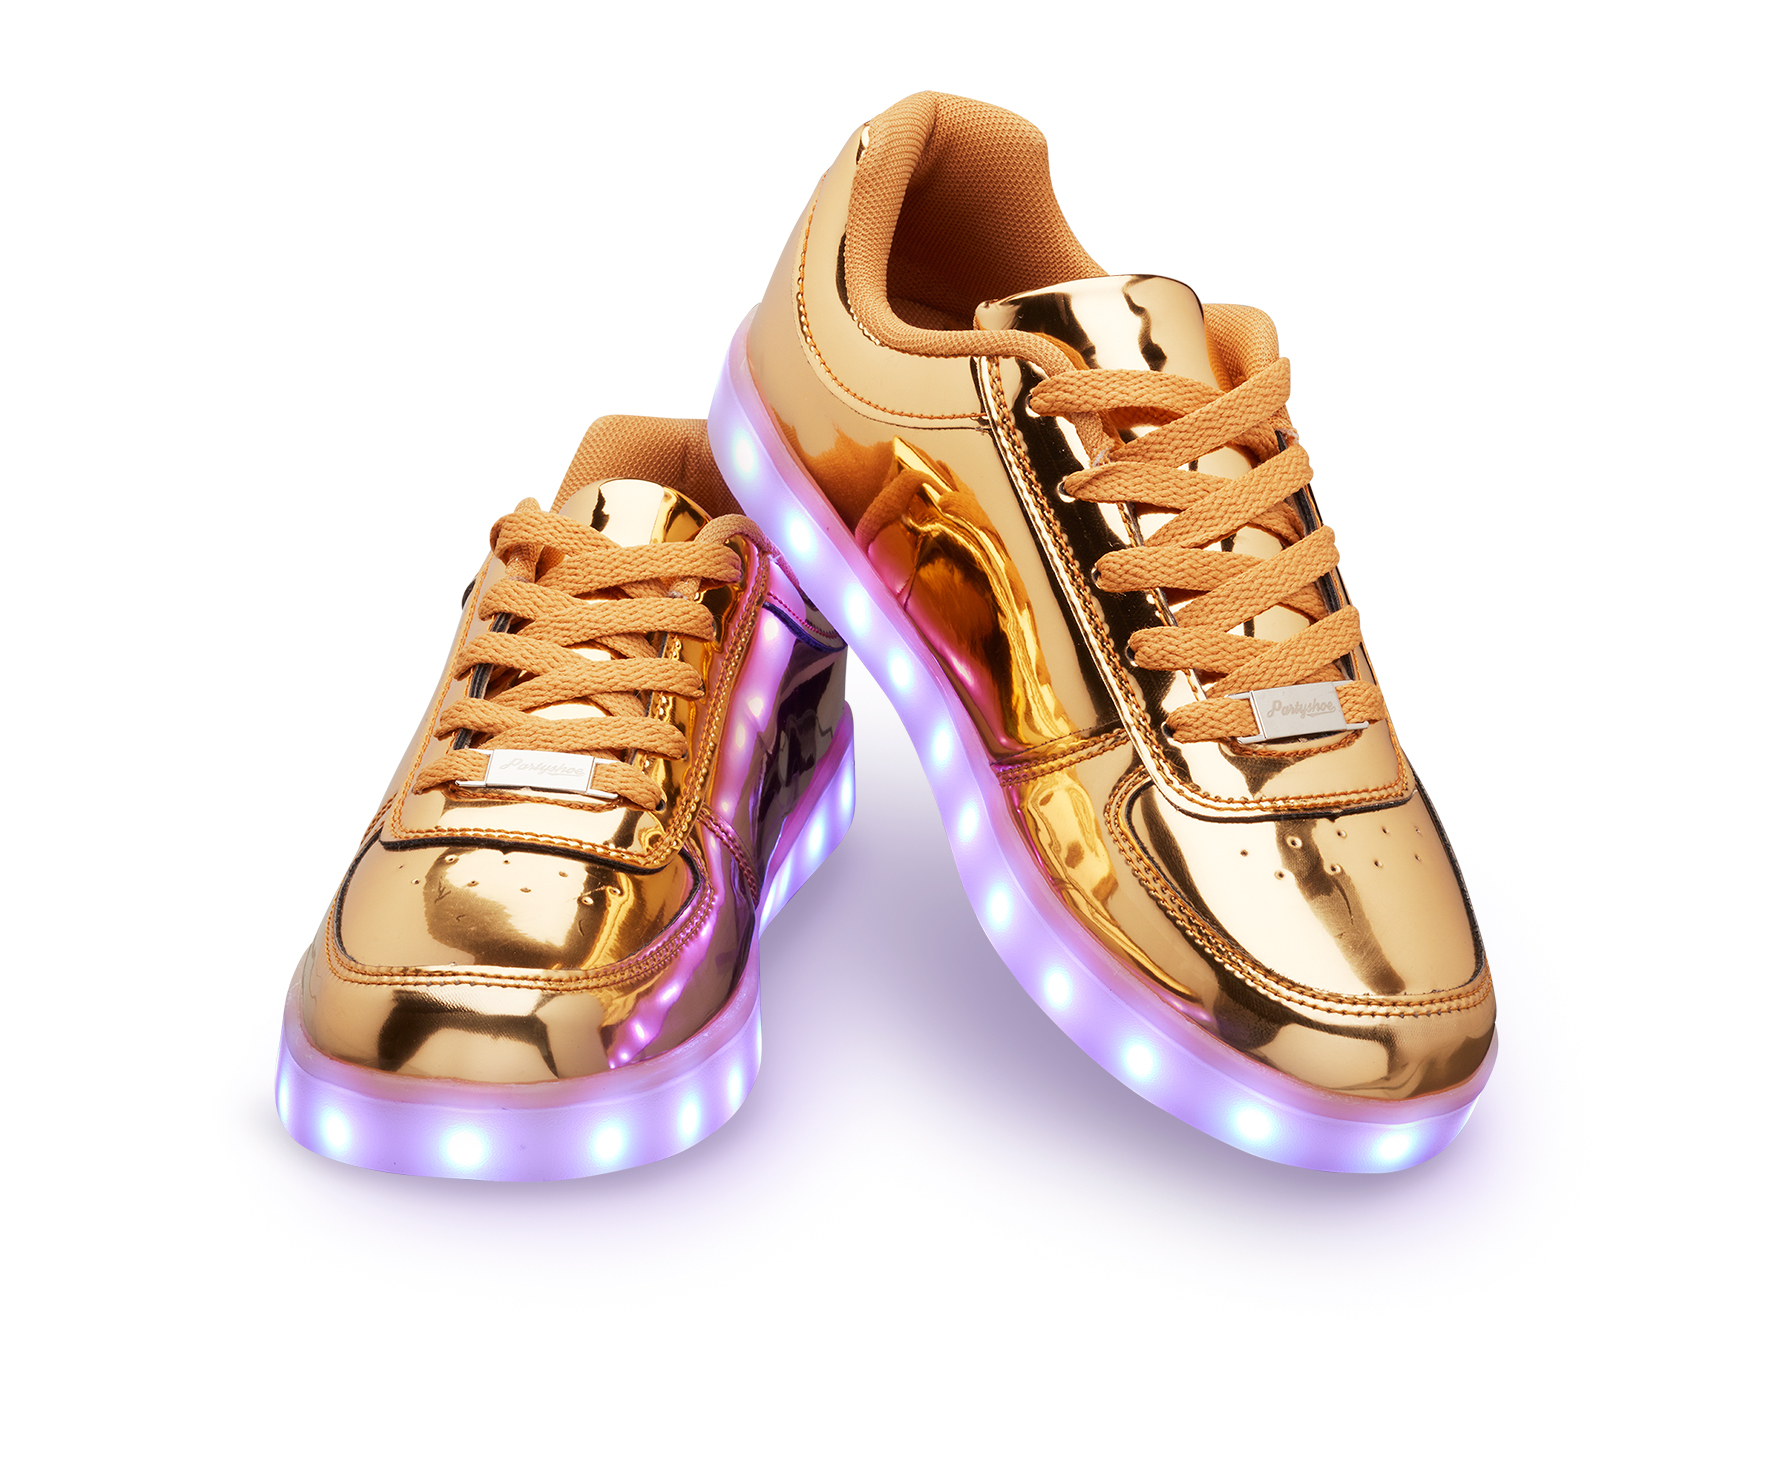 LED Shoes gold limited edition - Partyshoe